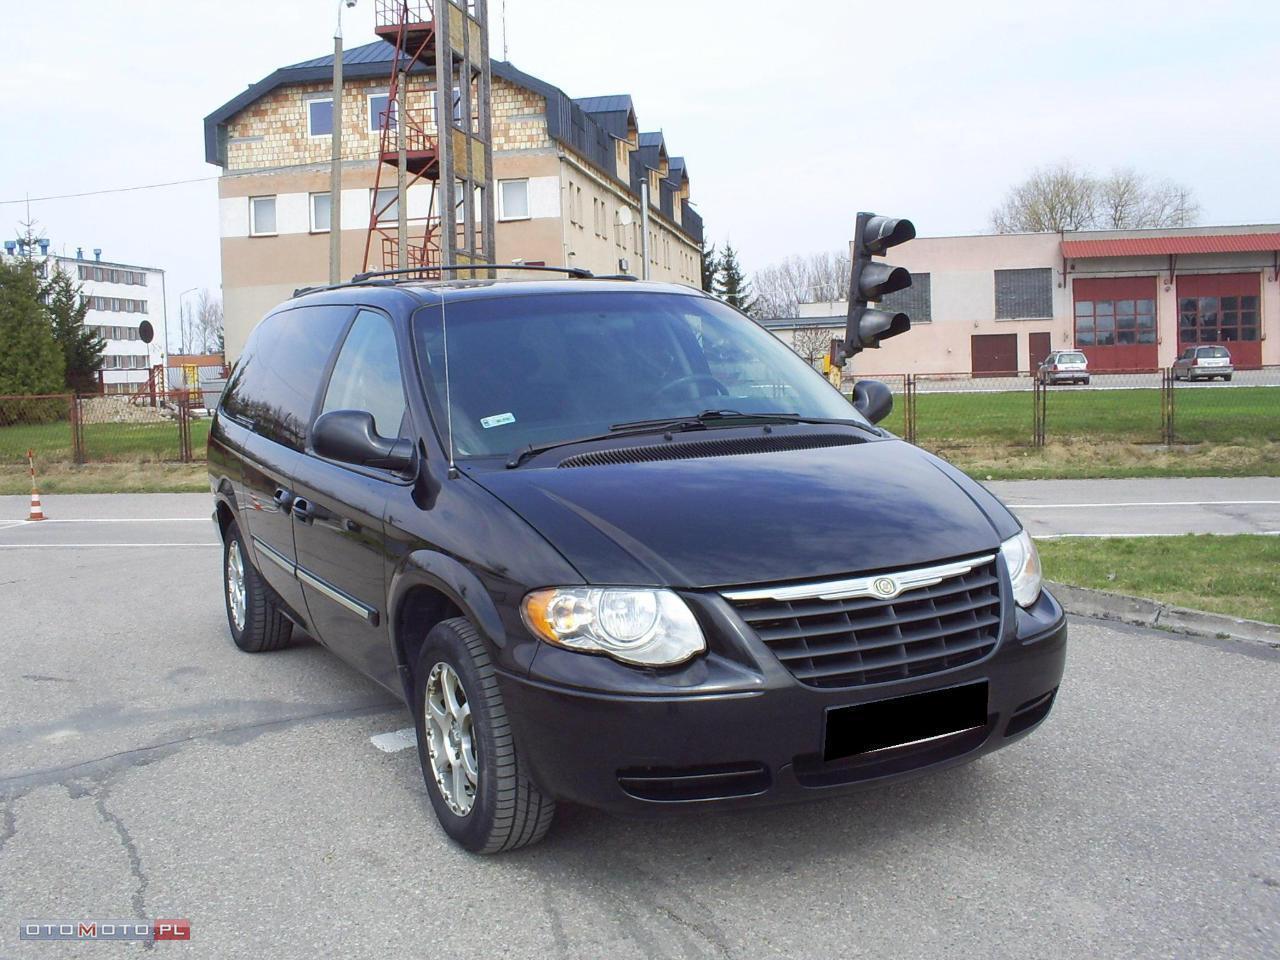 Chrysler Town & Country 3.8 - 210 KM